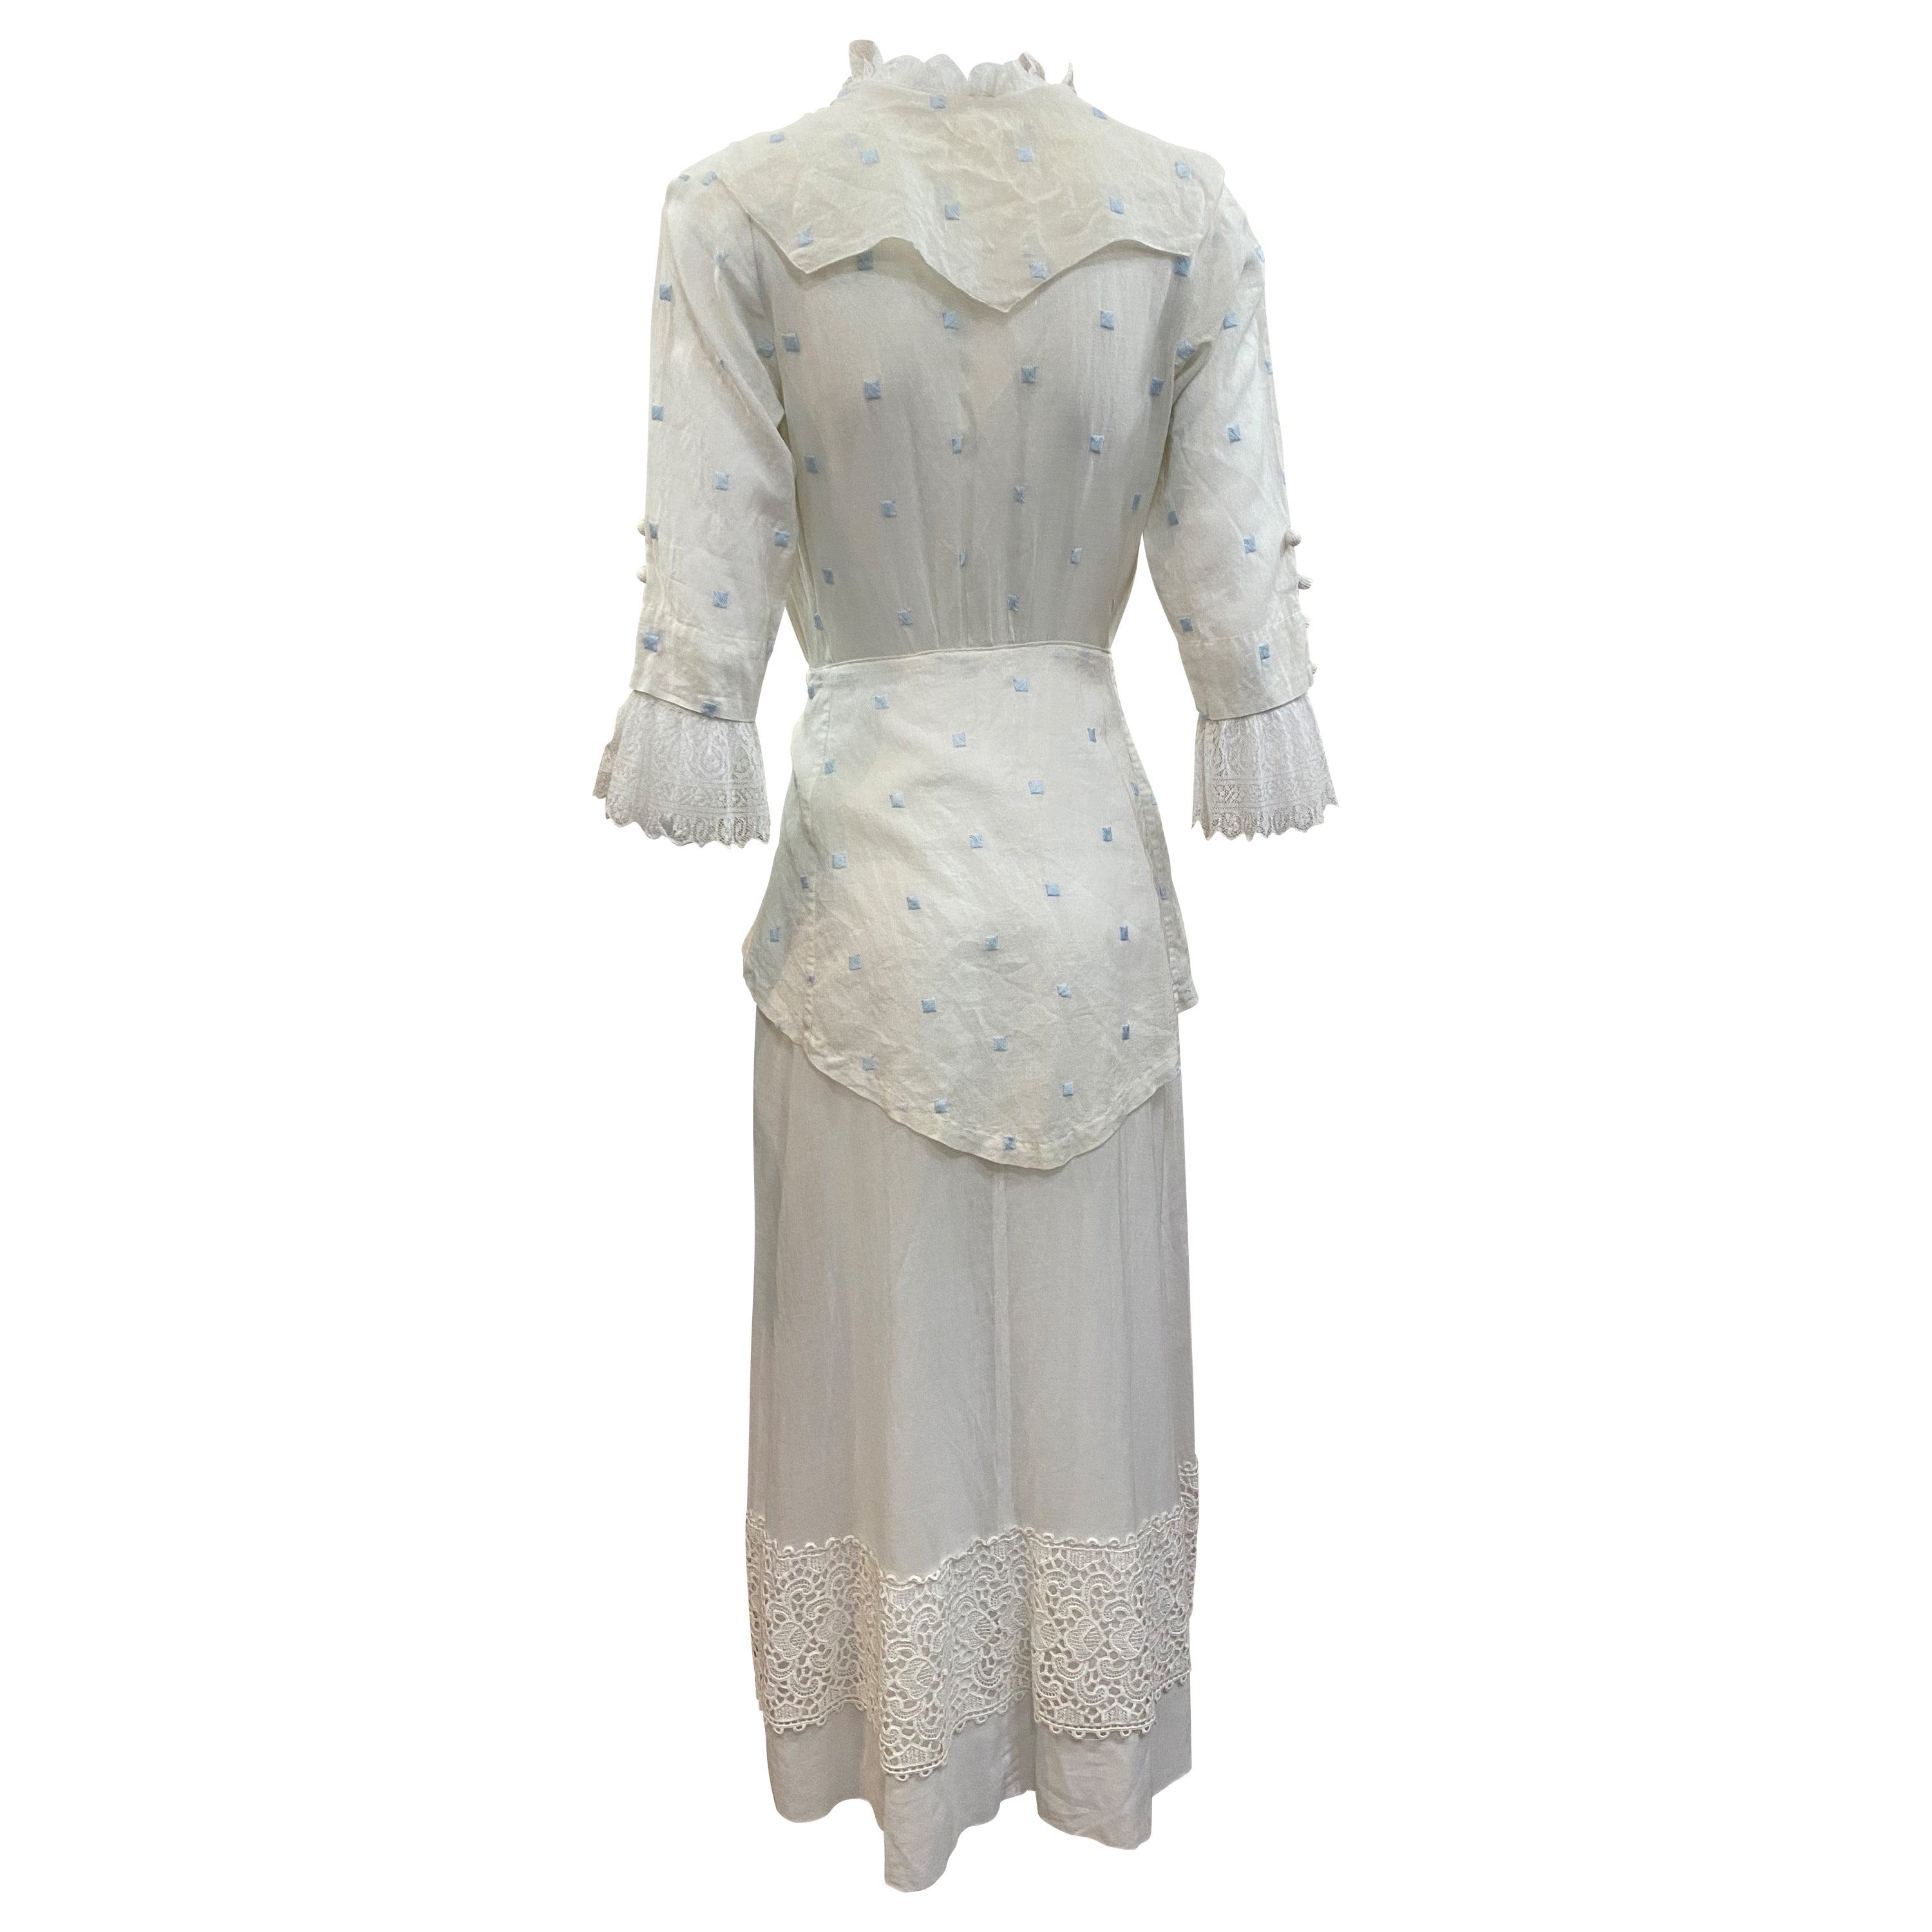 Edwardian White with Hand Embroidered Blue Polka Dot Lawn Dress, baack